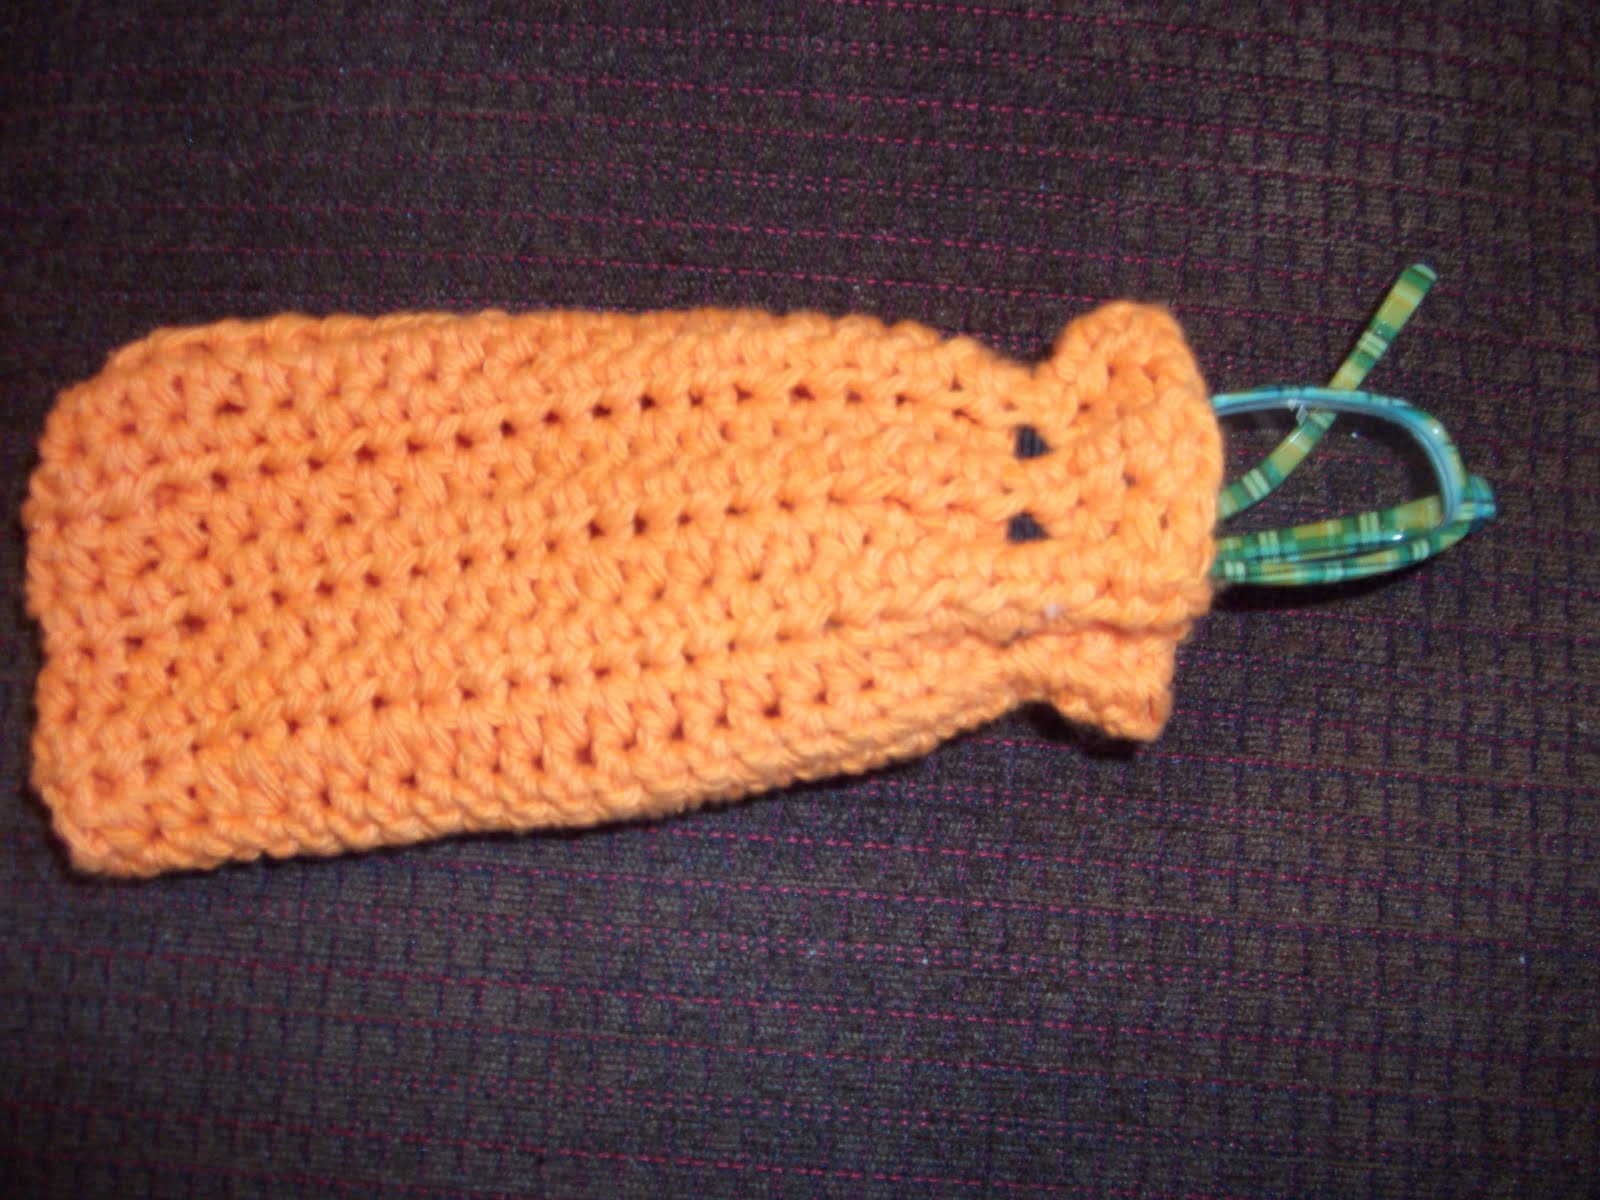 This last pattern shows how to crochet an Eyeglass case